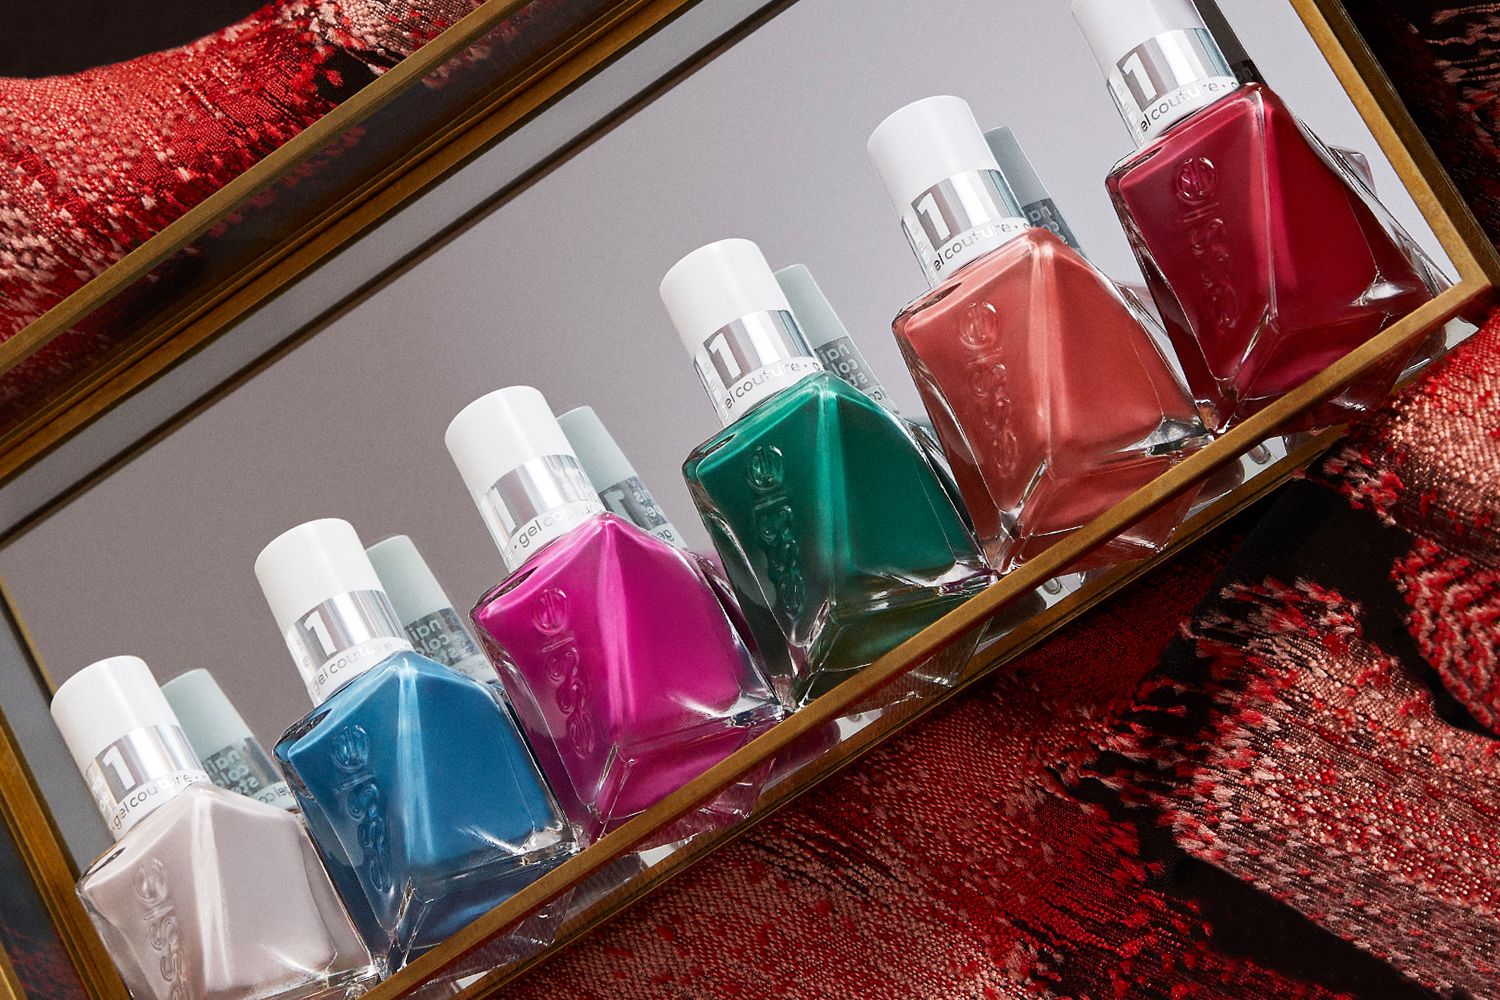 Essie Limited Edition Holiday Nail Polish Gift Set - 6pc : Target